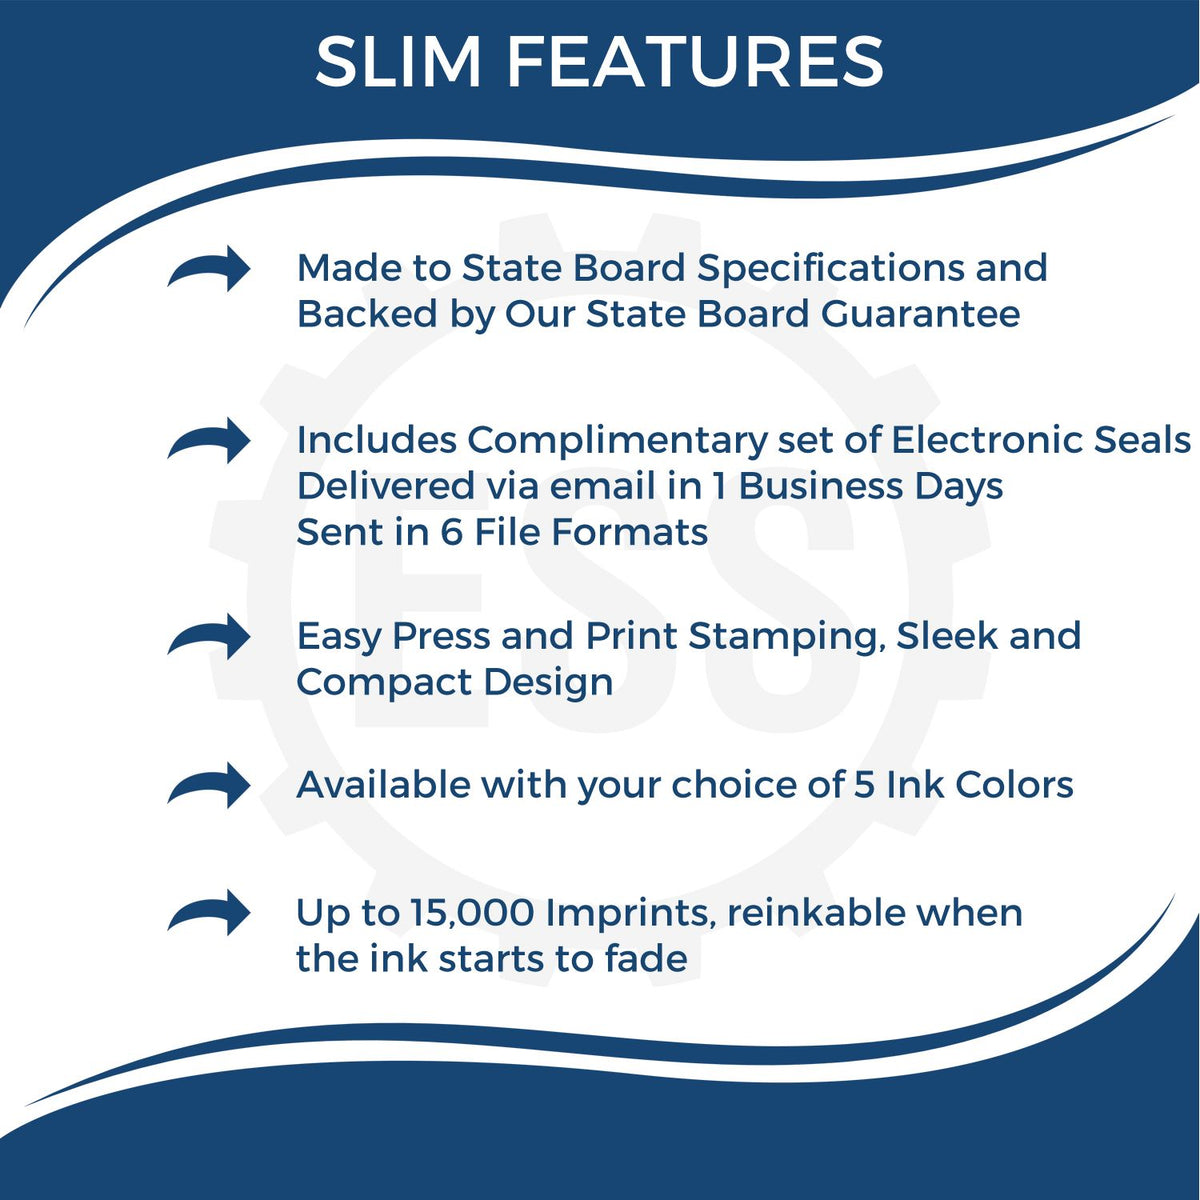 A picture of an infographic highlighting the selling points for the Super Slim New Jersey Notary Public Stamp